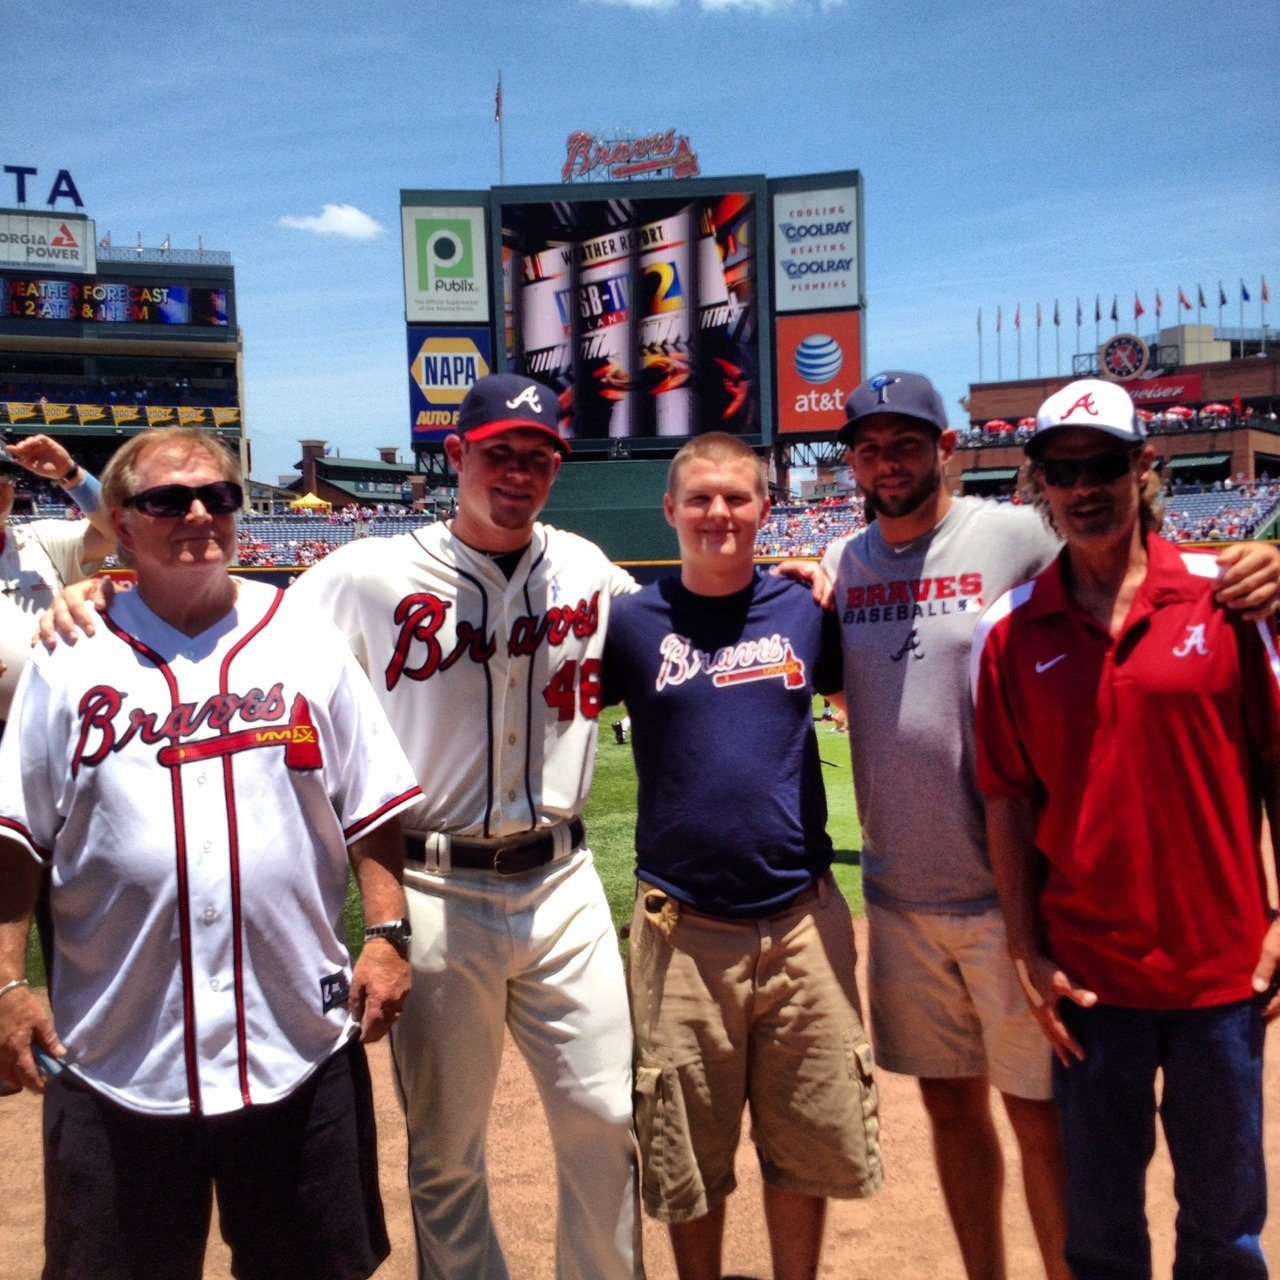 The Braves on tumblr — Craig Kimbrel poses with his father